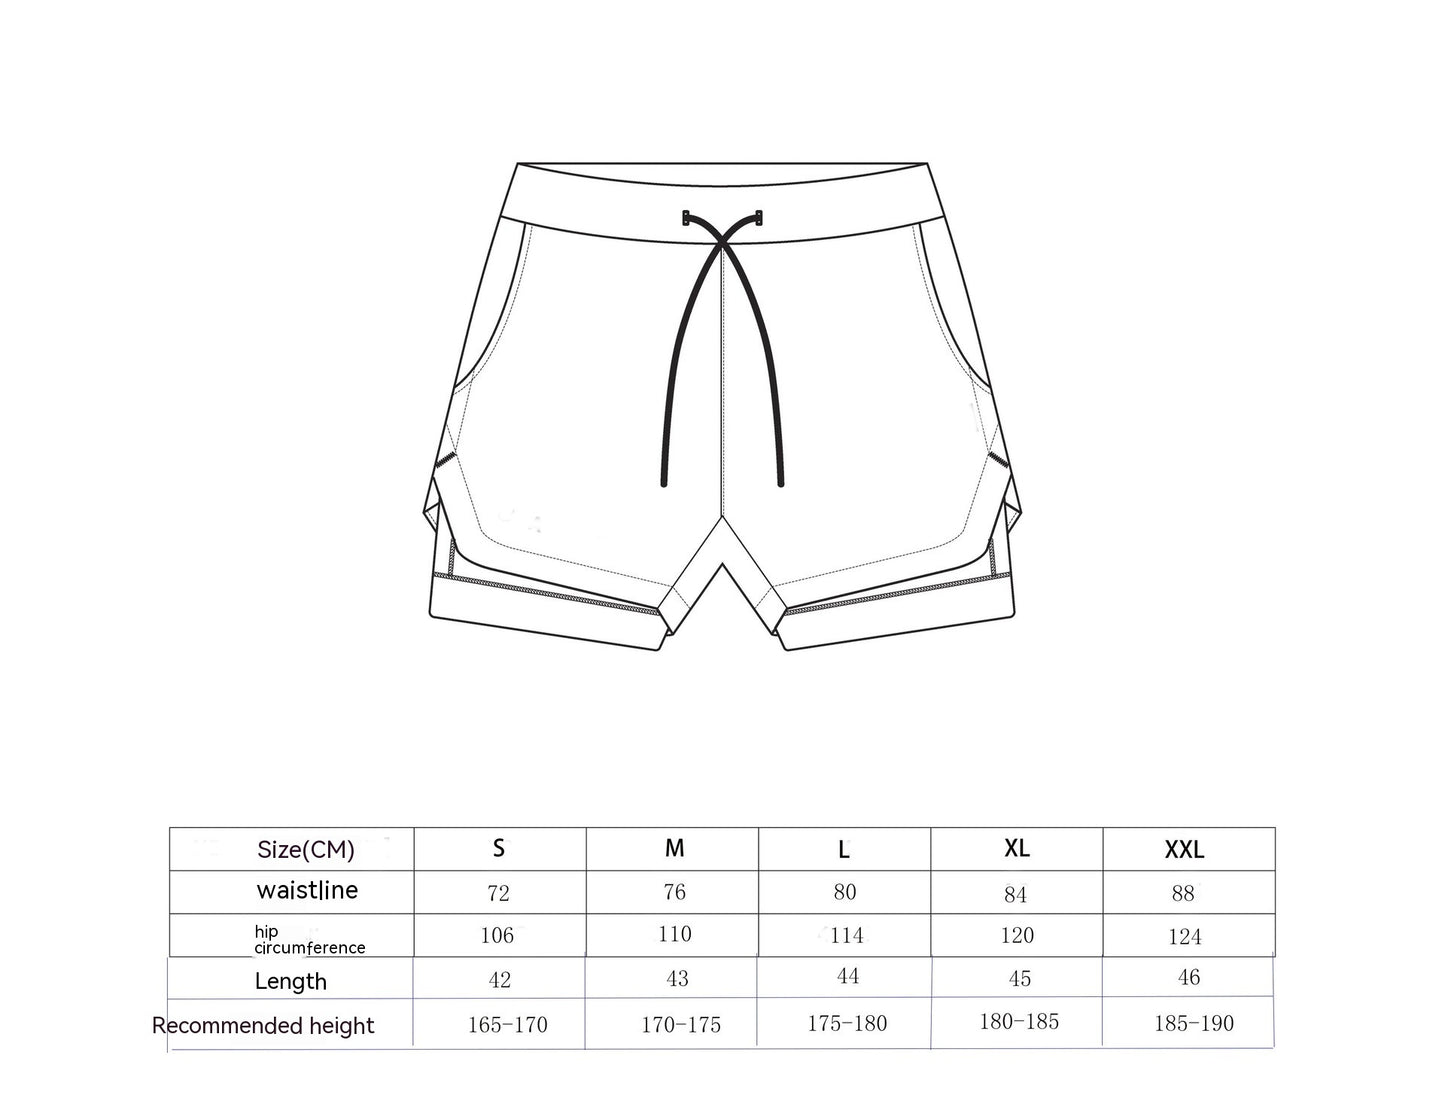 Men's Breathable Quick-drying Summer Sport Shorts